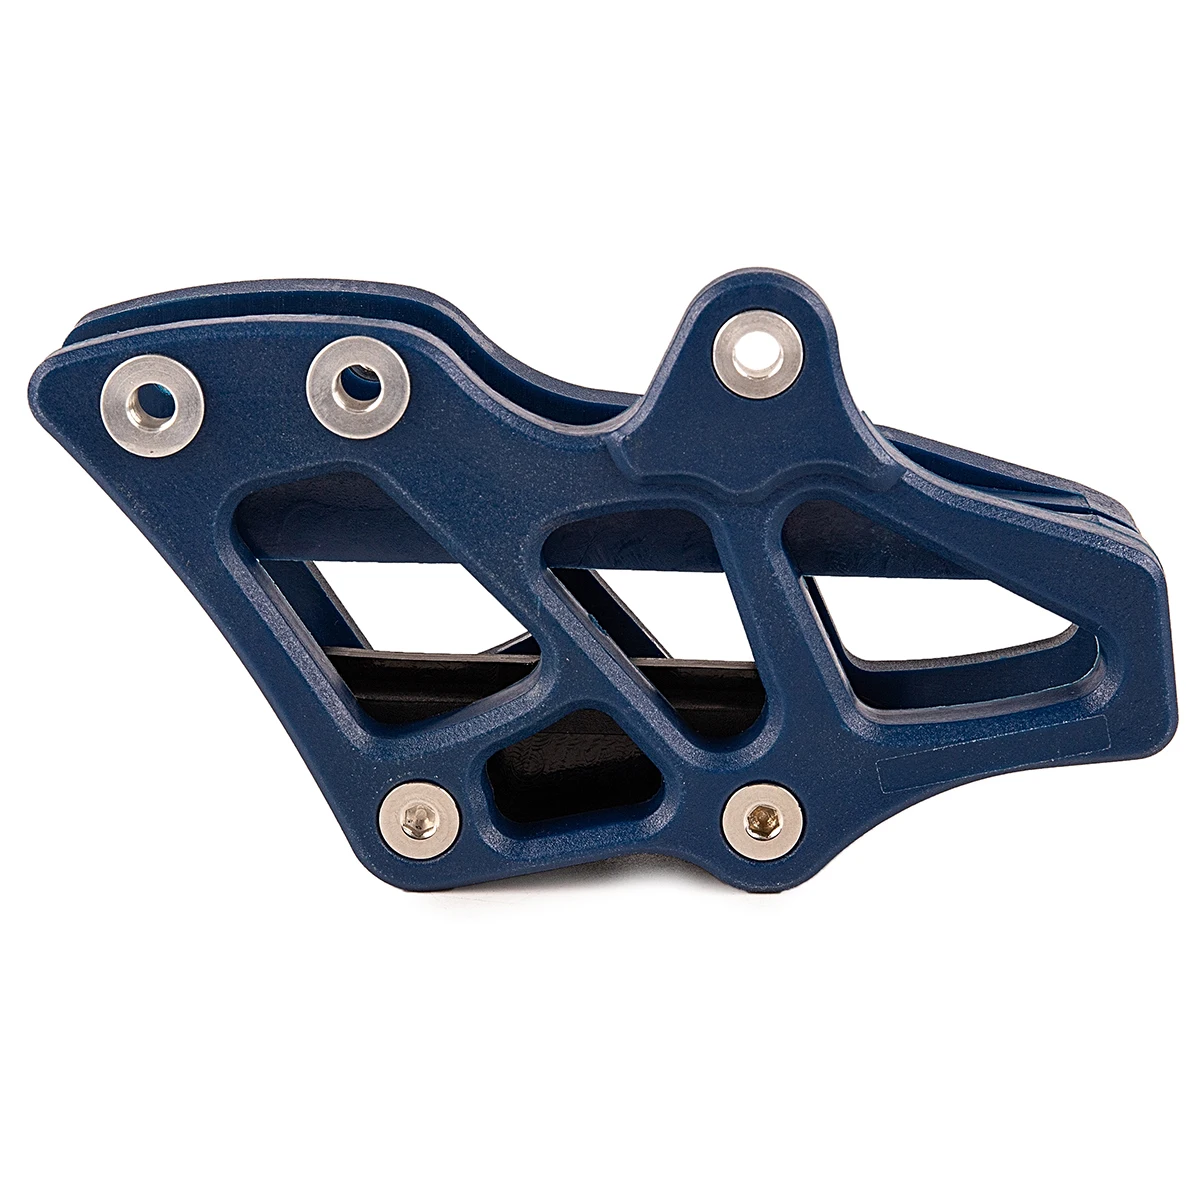 Motorcycle Rear Chain Guard Guide Protector For Yamaha YZ125 YZ250 2008-2019 YZ250F YZ450F WR250F 2007-2019 YZ250X YZ450FX 2016-2019 WR450F 2007-2018 YZ250FX 2015-2019 